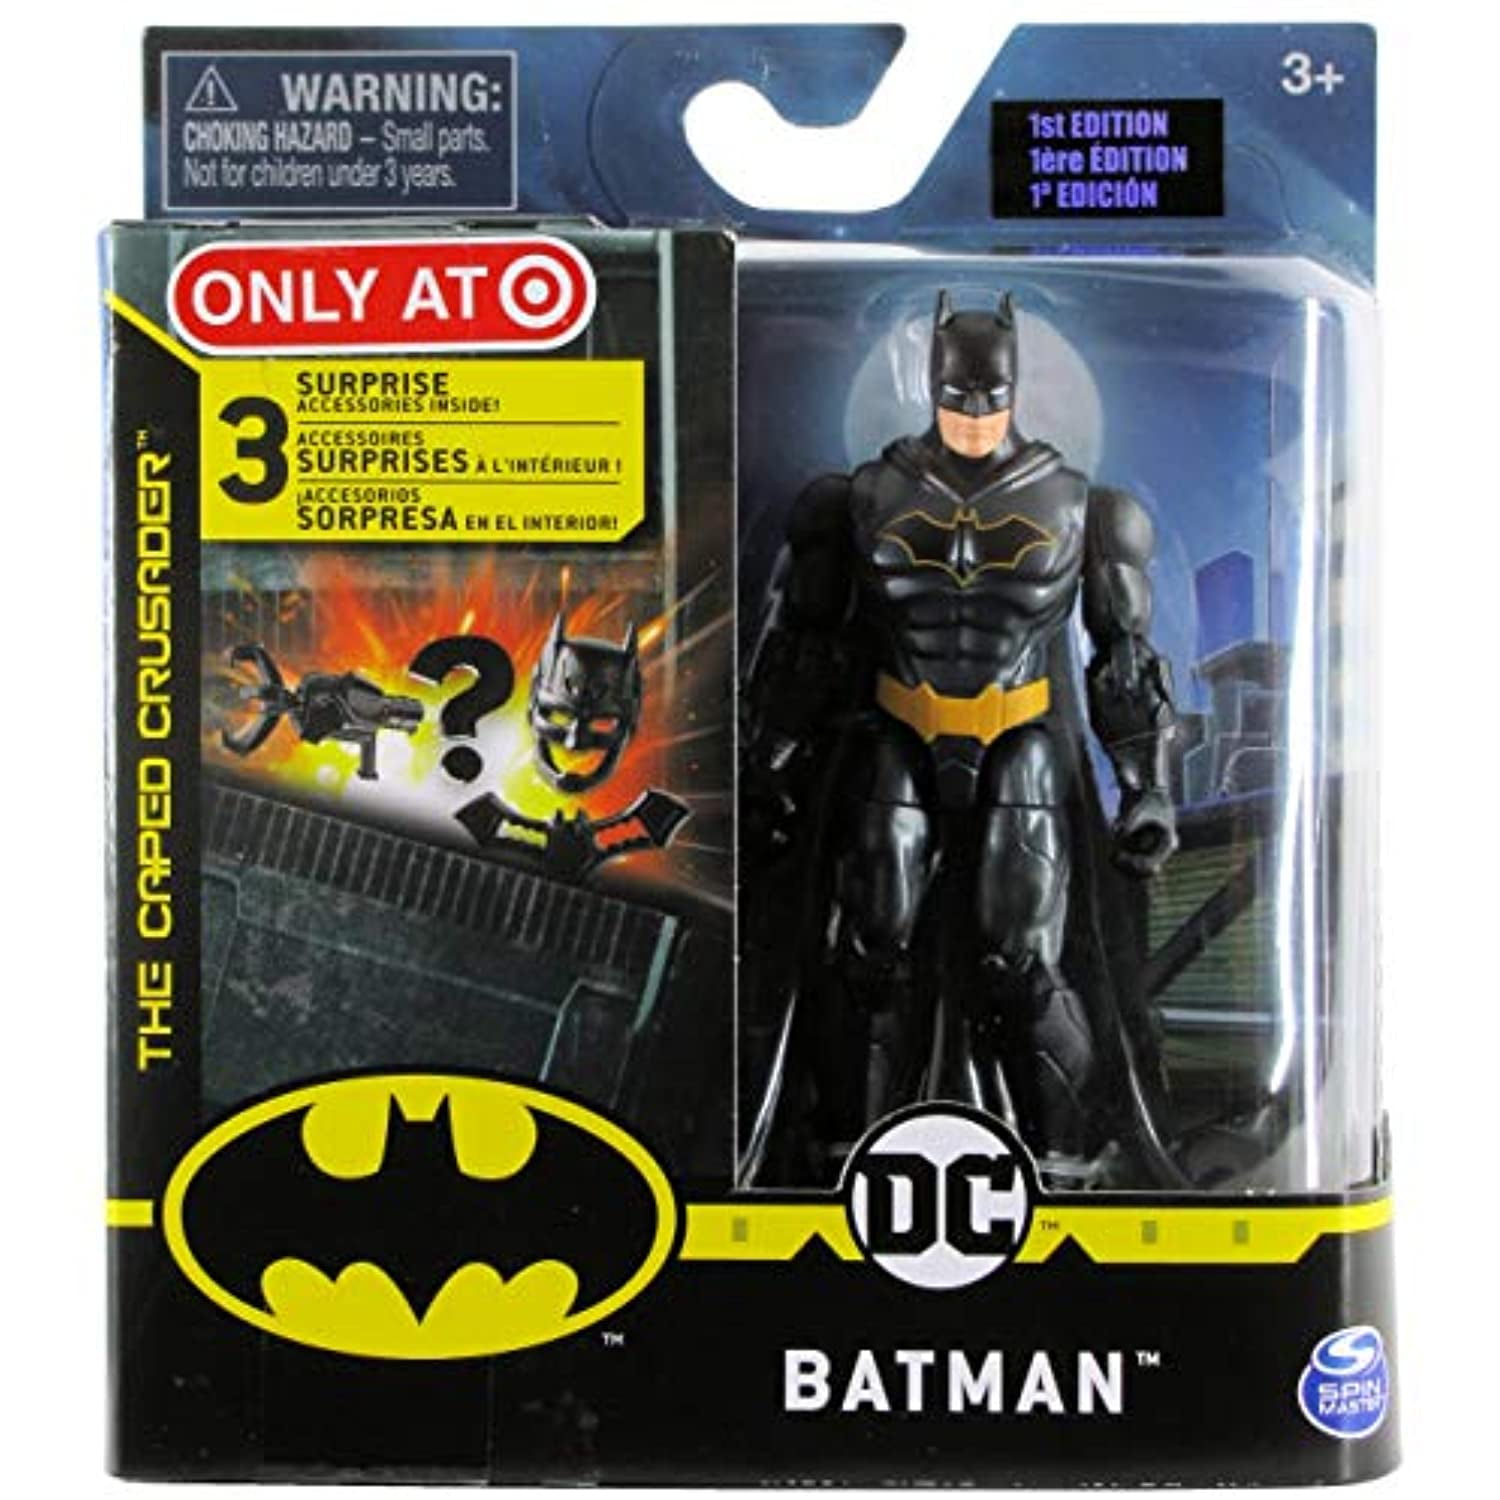 2021 4” DC Batman 3 Surprise Accessories by Spin Master Target HTF for sale online 